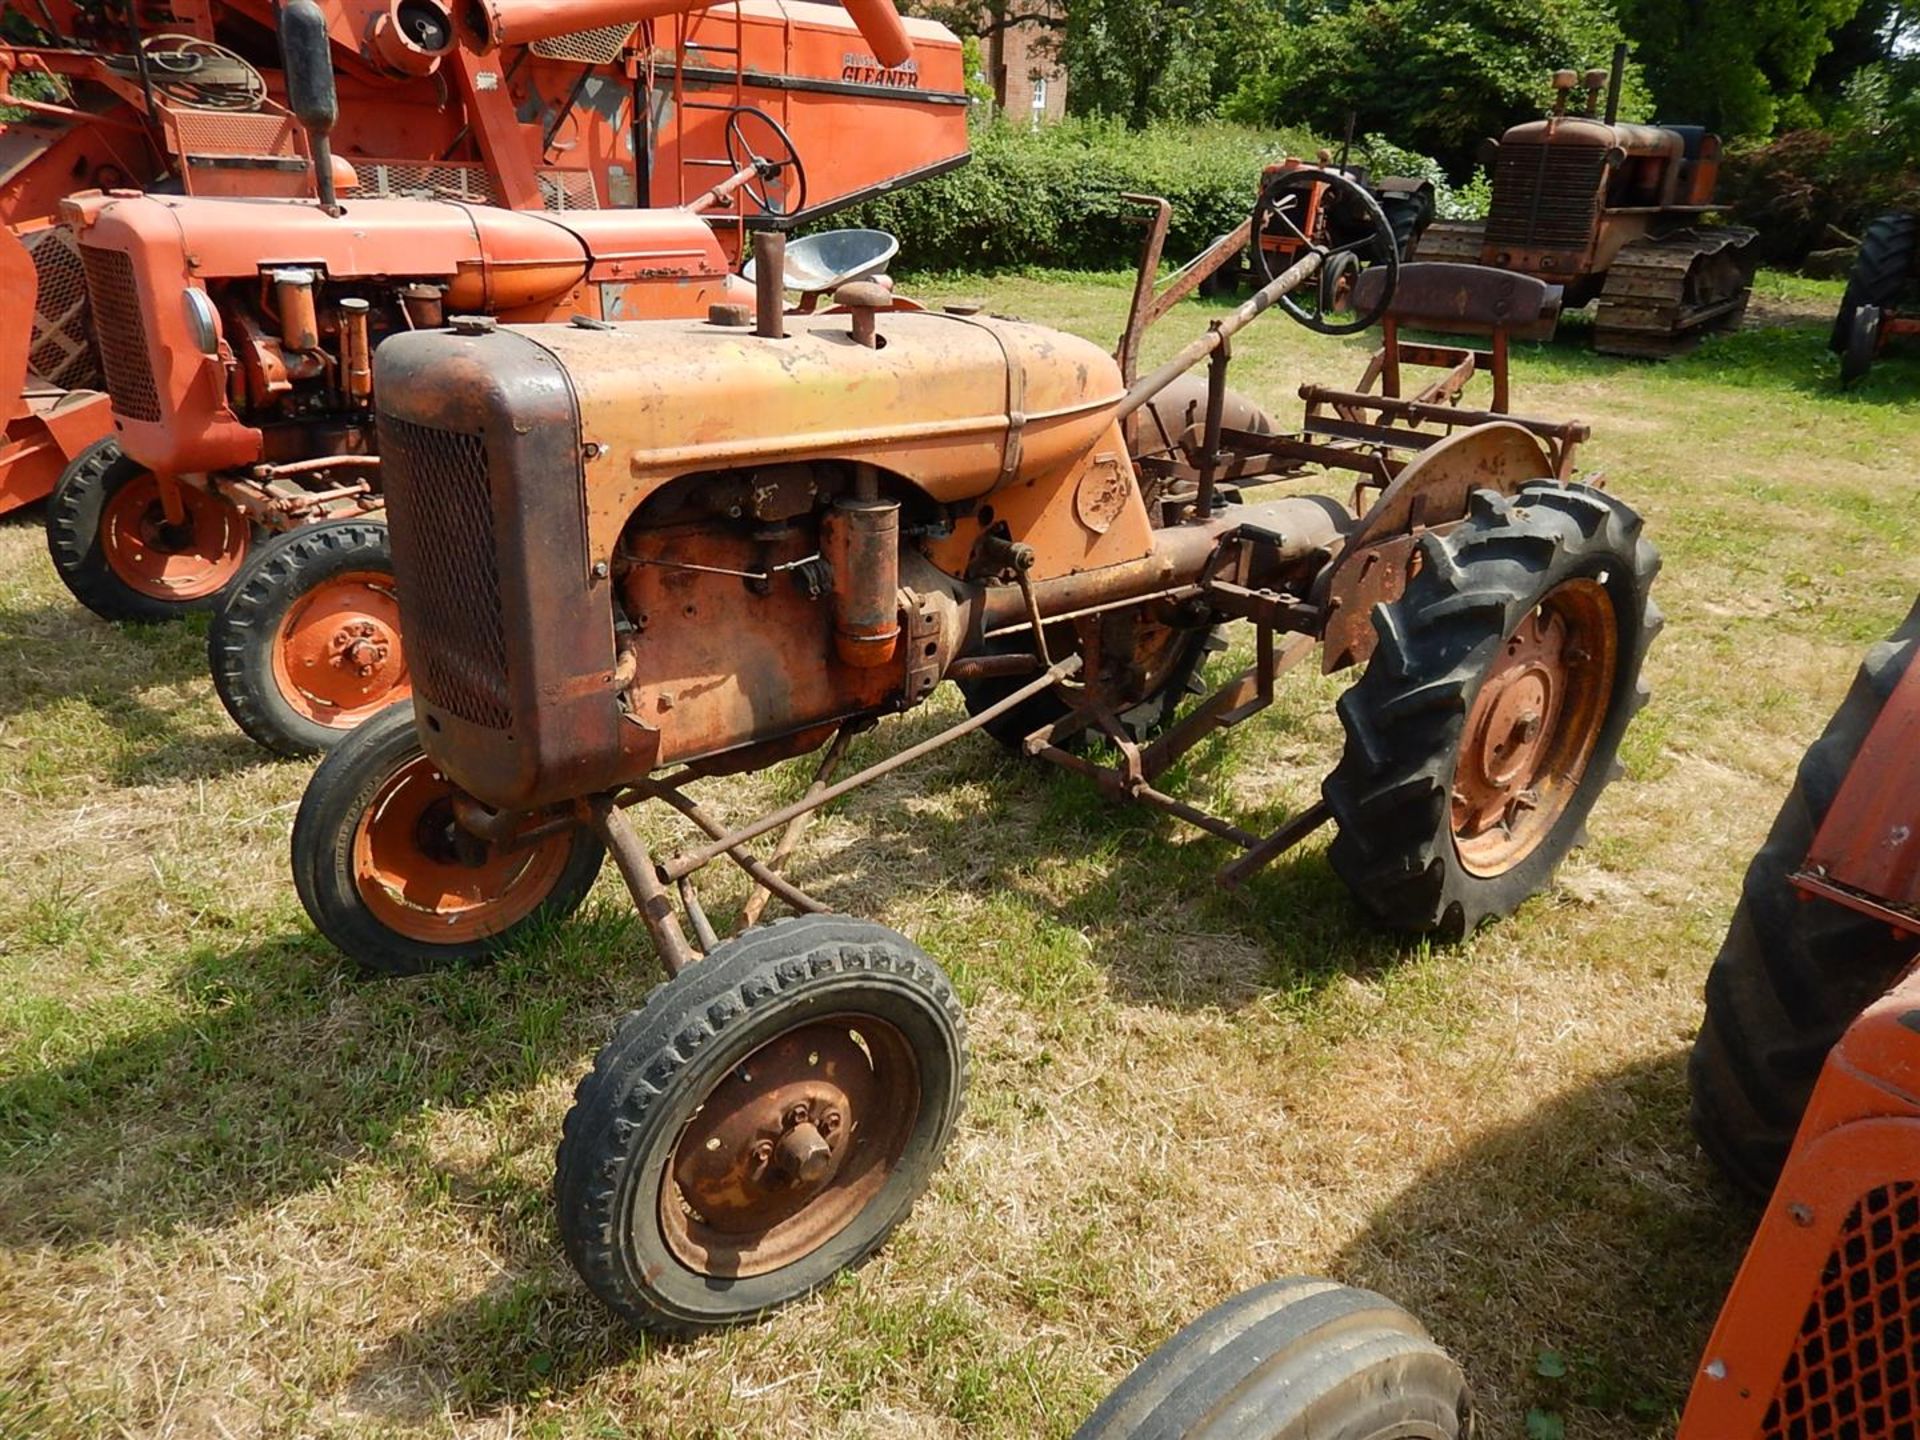 ALLIS CHALMERS Model B 4cylinder petrol/paraffin TRACTOR Reg. No. EAB 630 (expired) Fitted with an - Image 2 of 4